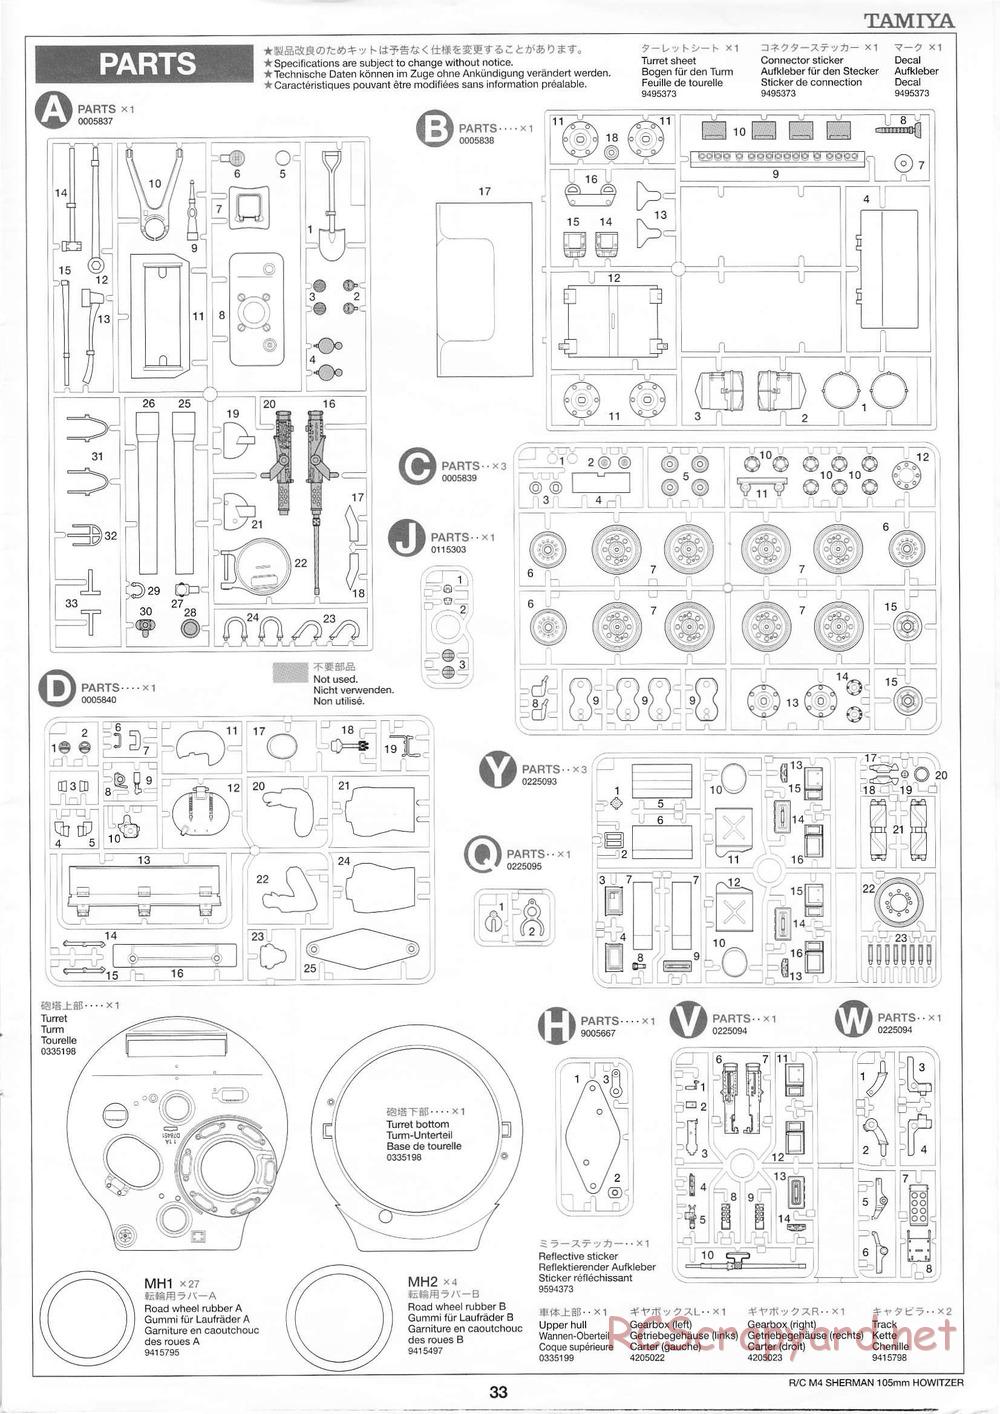 Tamiya - M4 Sherman 105mm Howitzer - 1/16 Scale Chassis - Manual - Page 36